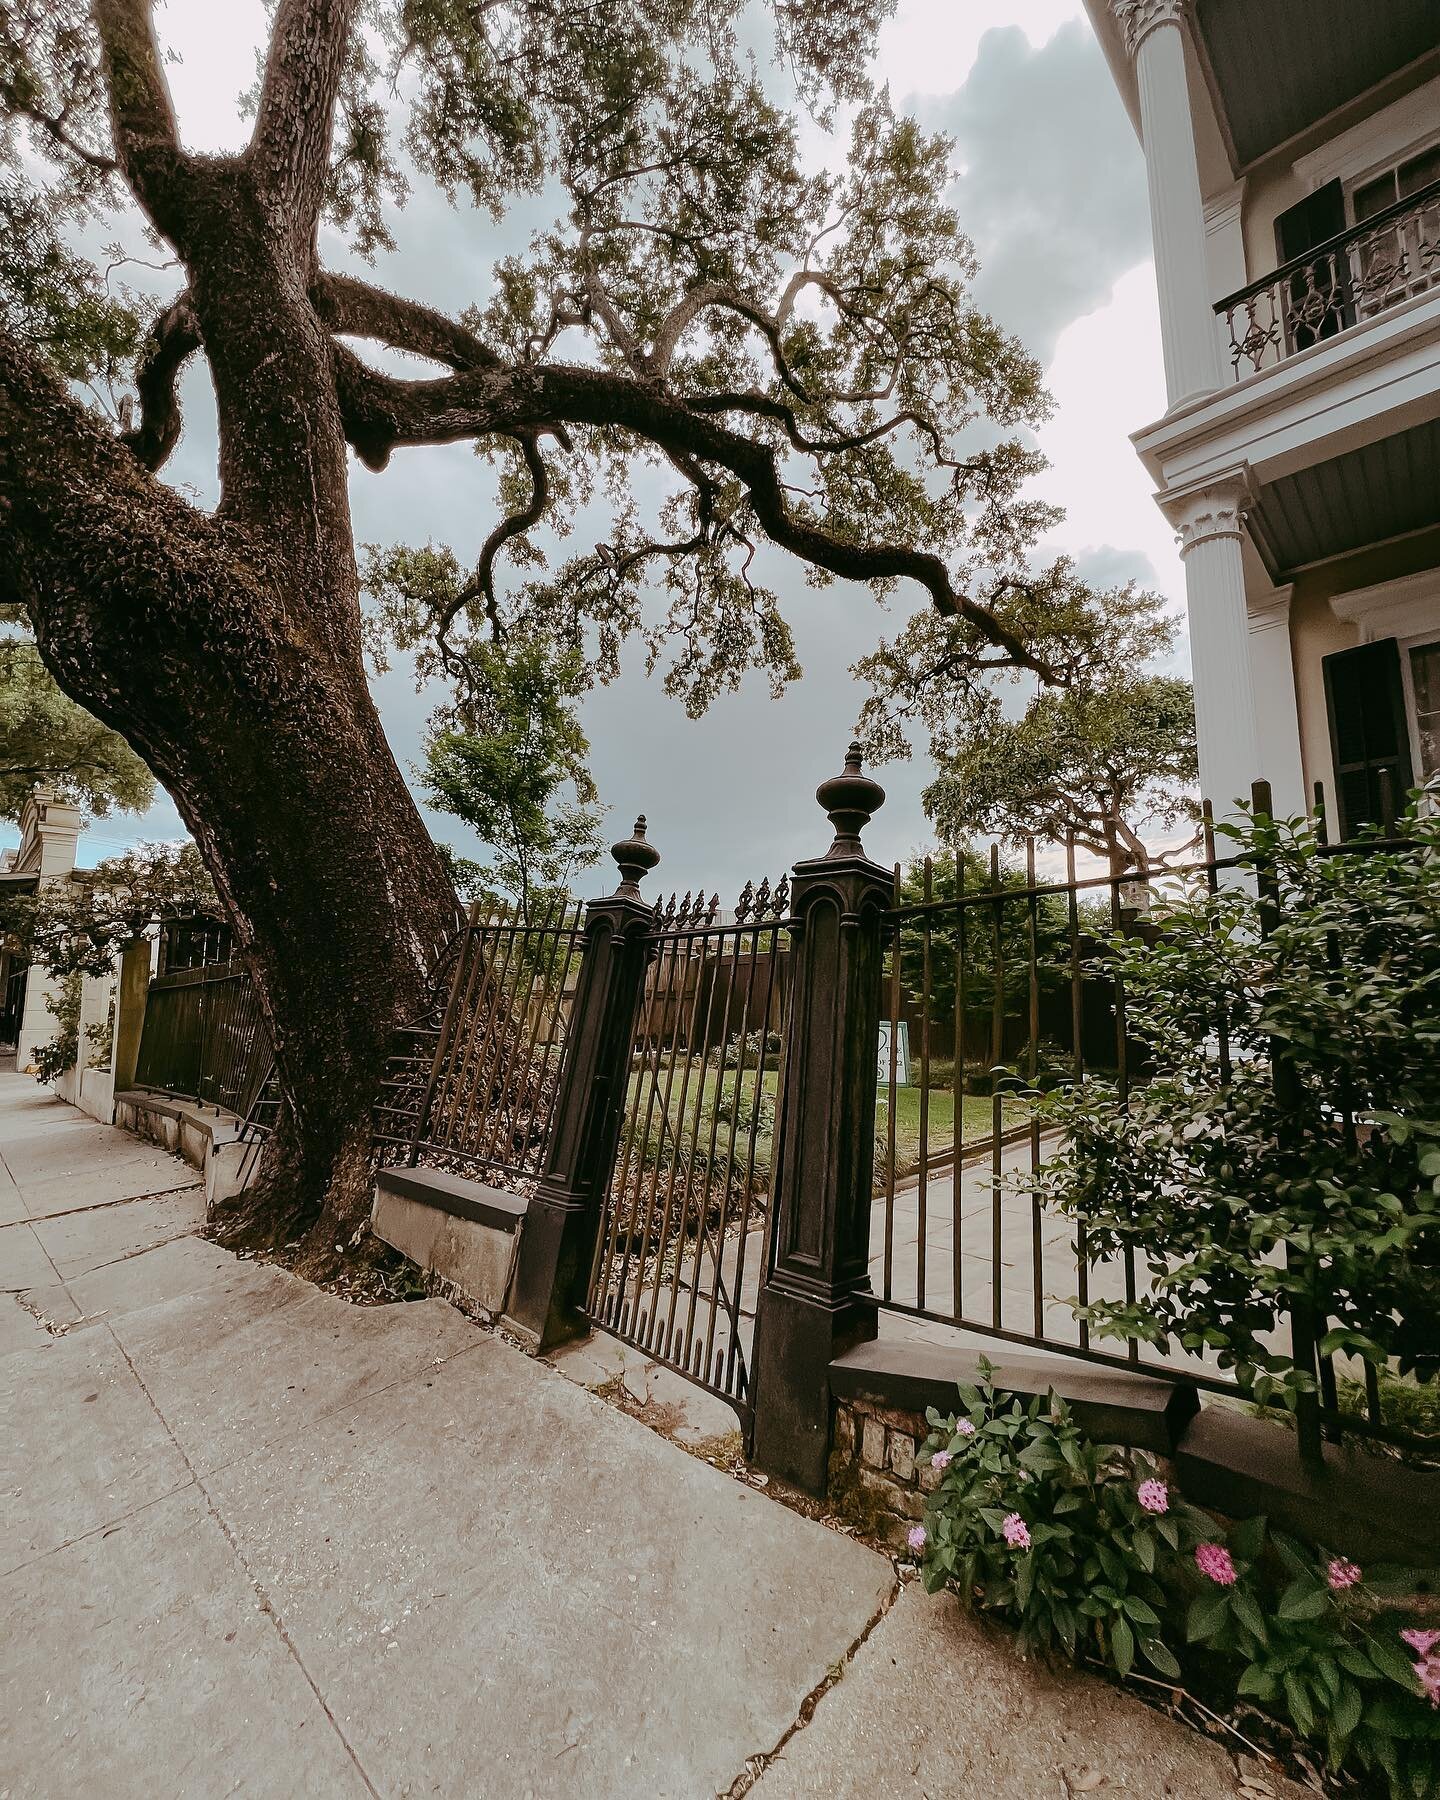 Perspective. And a little bit of a contradiction.  #neworleans #nola #gardendistrict